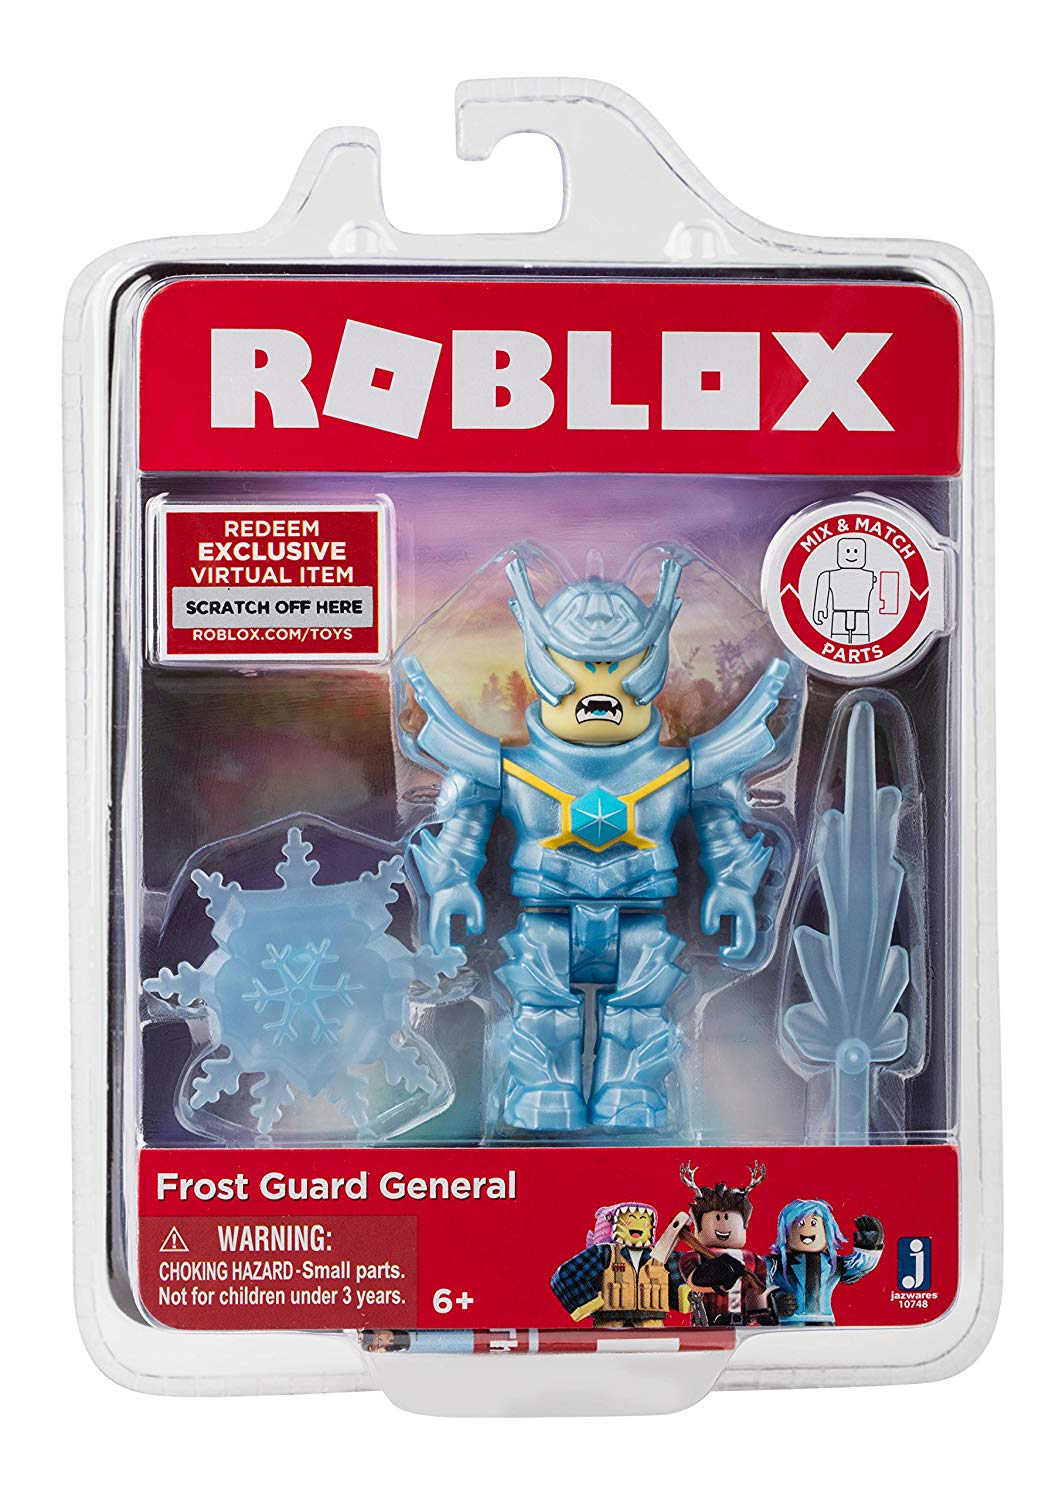 sdcc 2019 exclusive roblox toy